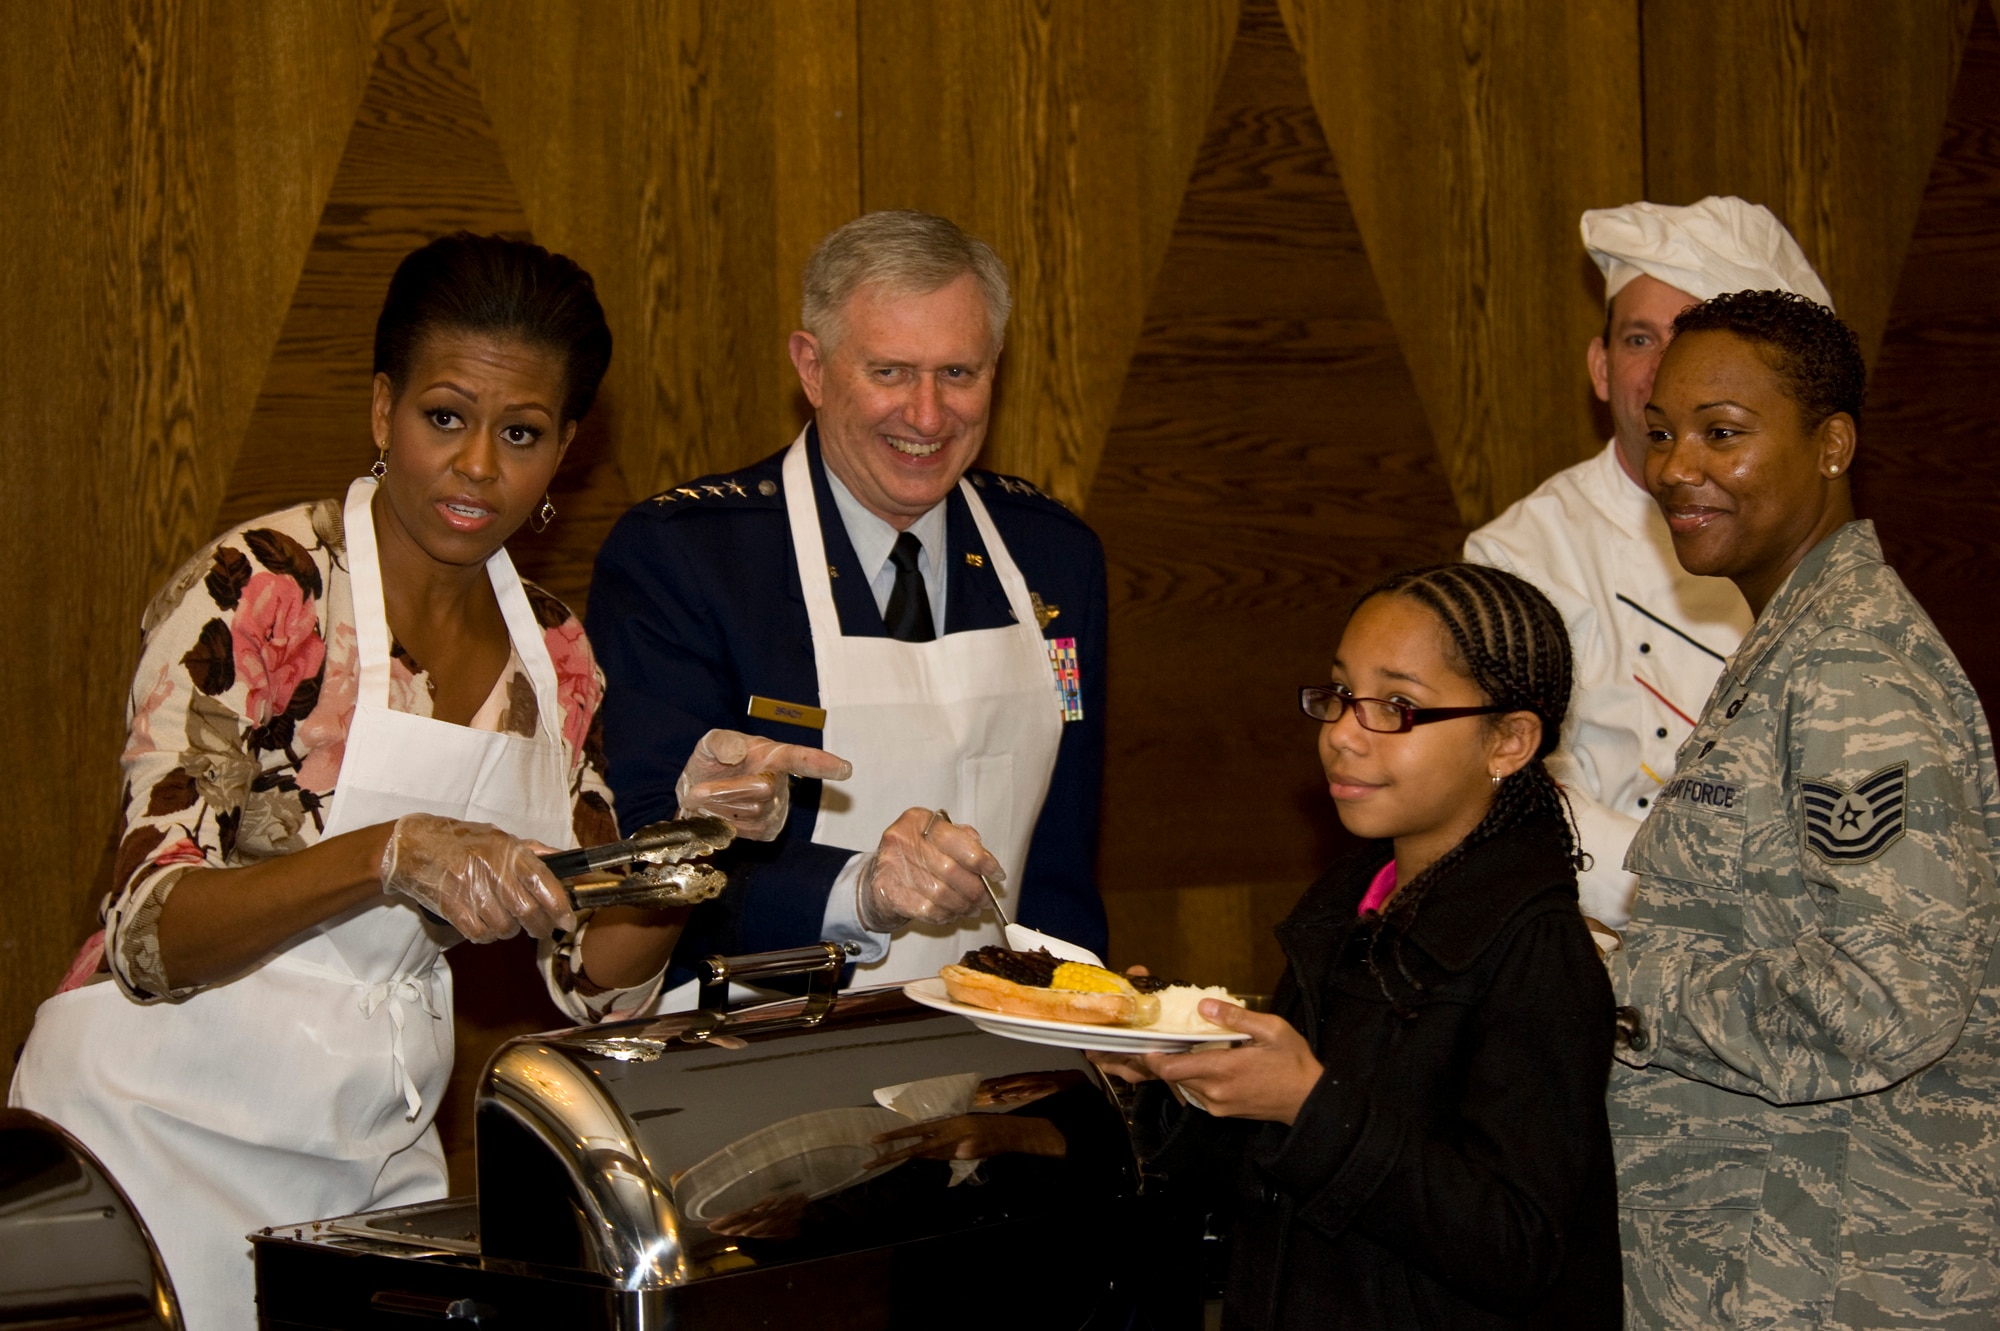 First Lady Michelle Obama and Gen. Roger A. Brady, U.S. Air Forces in Europe commander, ask the press pool if they want a dinner plate while serving military members and their families at the Officers Club at Ramstein Air Base, Germany, Nov. 11, 2010. The First Lady made a surprise visit to Ramstein during her return from a nine-day tour of Asia to show her support for servicemembers and their families during this Veterans Day. She met with wounded servicemembers at Landstuhl Regional Medical Center, served lunch, talked briefly to the servicemembers and families and met with German first lady Bettina Wulff before flying on to the United States. (U.S. Air Force photo/Tech. Sgt. Wayne Clark) 